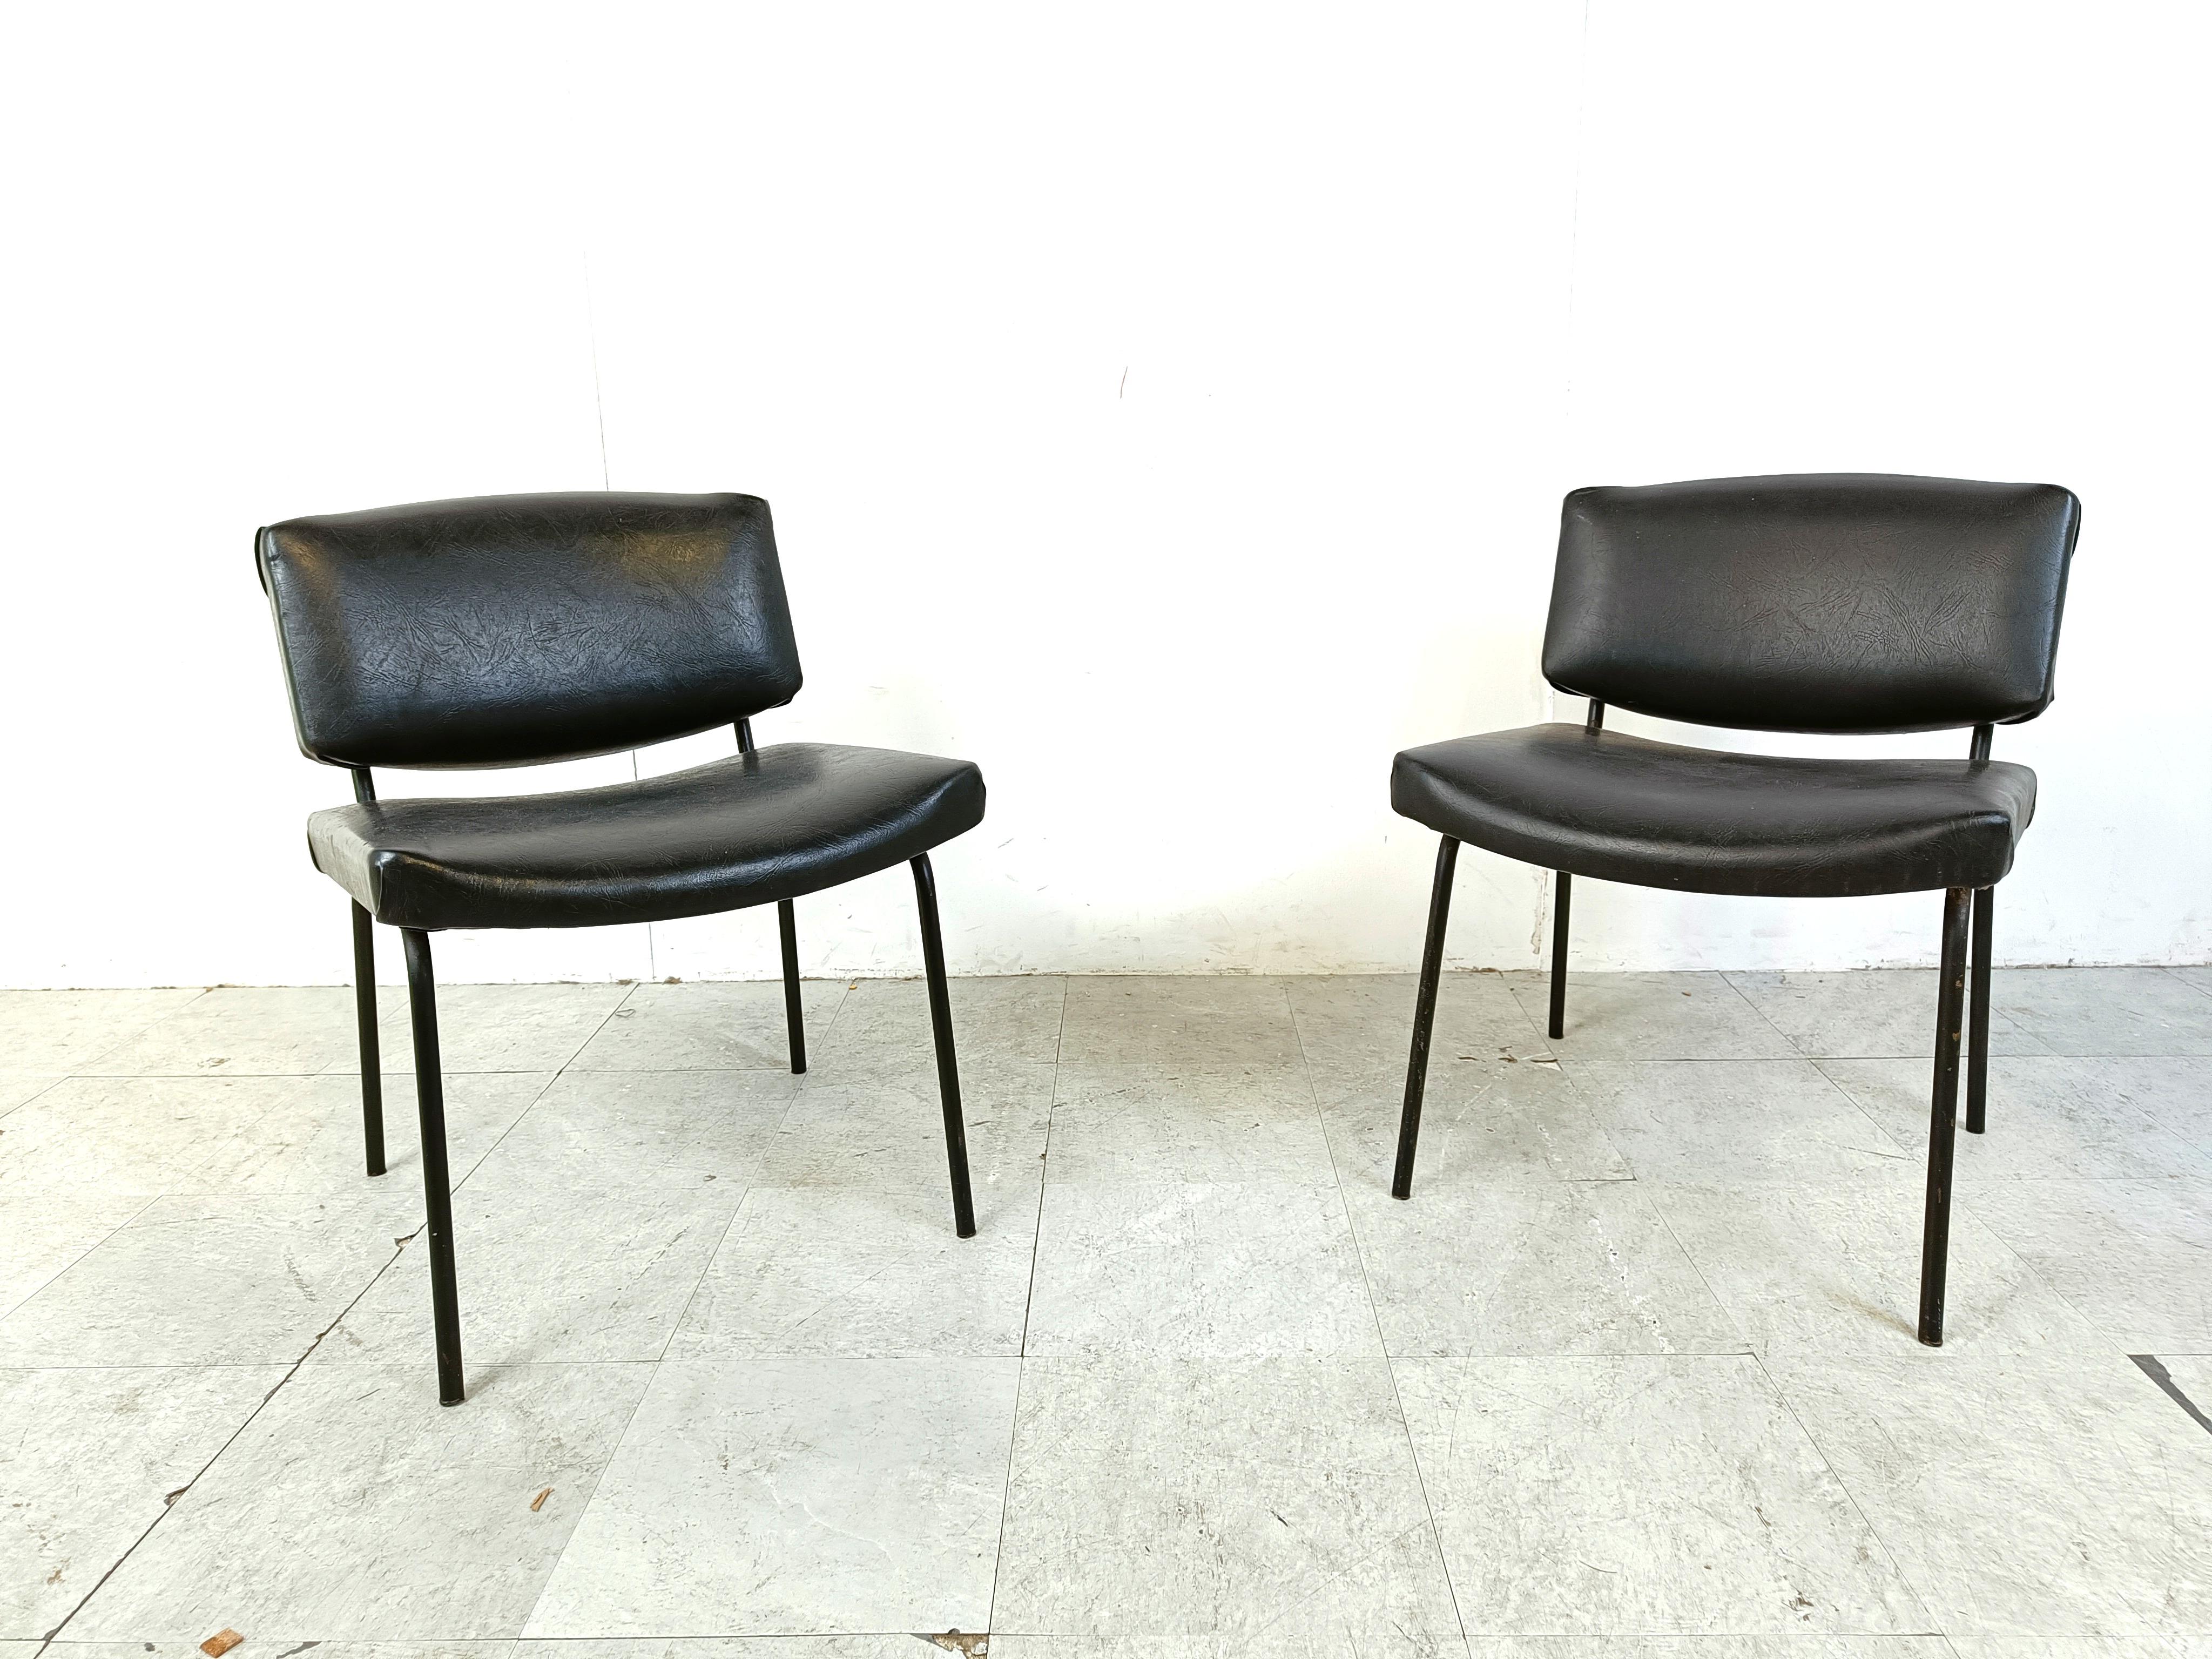 Mid-Century Modern Vintage Conseil Chairs by Pierre Guariche 1950's, France For Sale